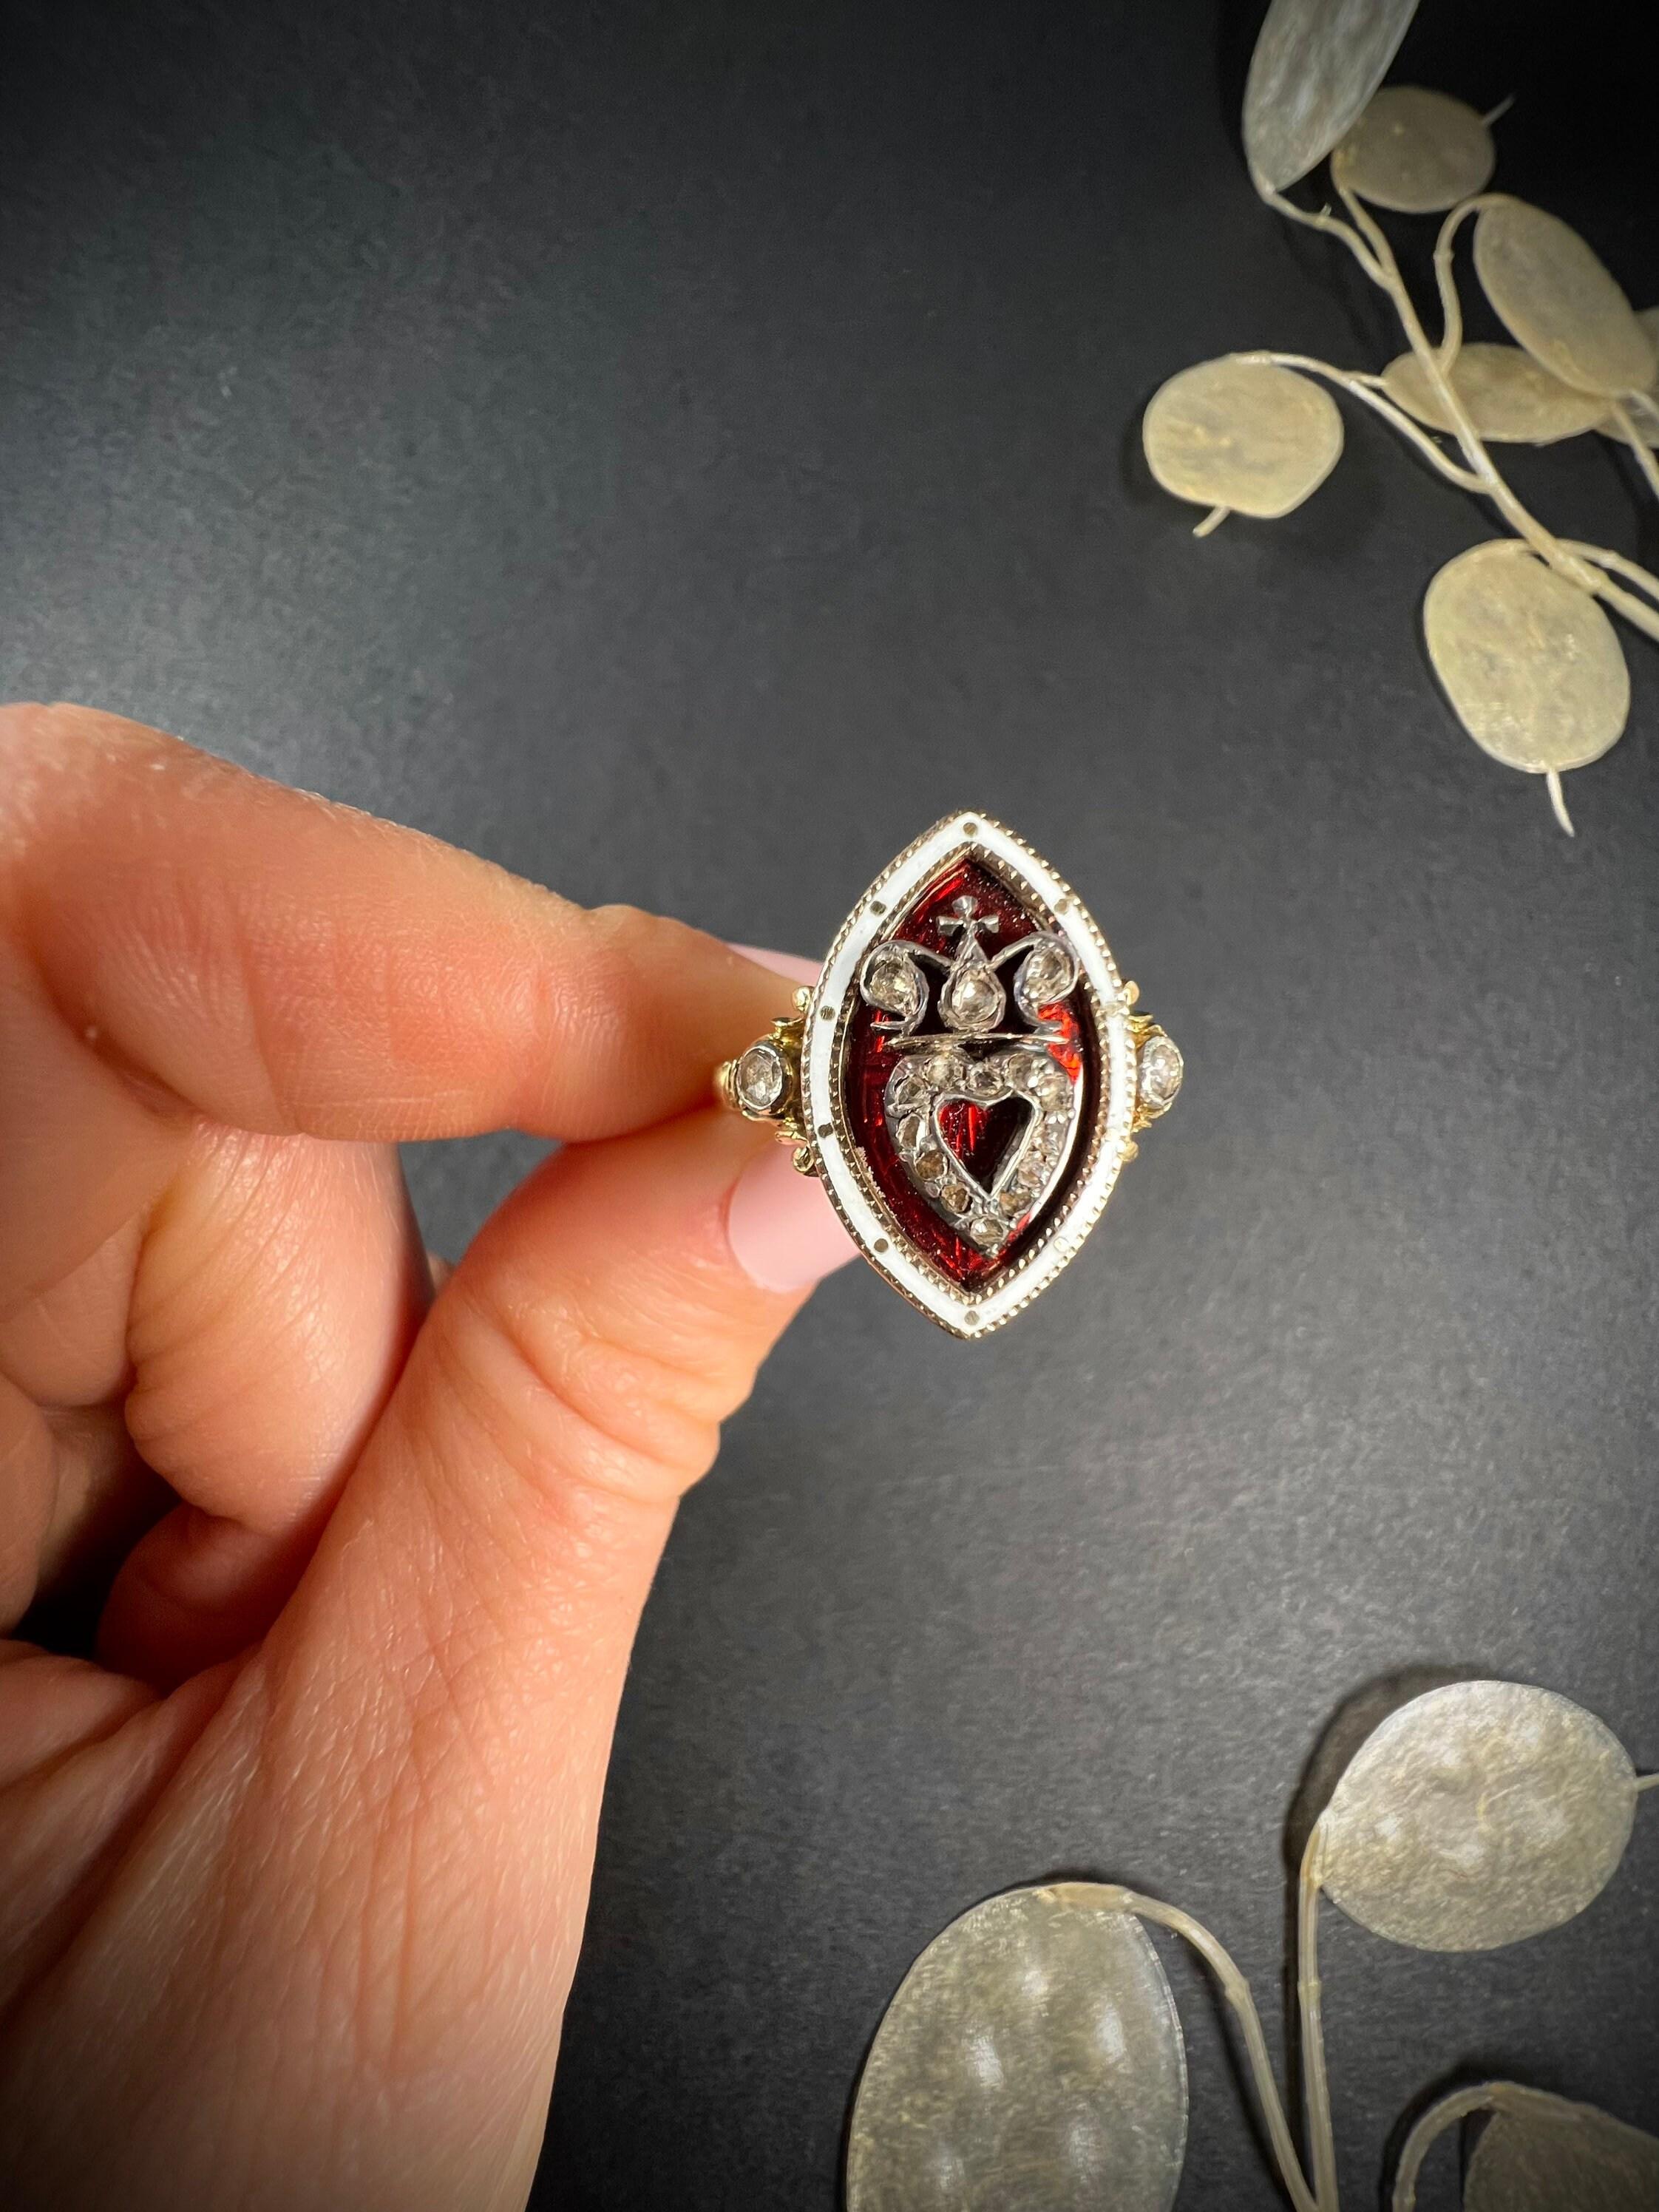 Antique Marquise Ring 

15ct Gold Tested 

Circa 1850

Fabulous, early Victorian ring. Beautiful marquise/navette shaped, decorated with gorgeous red & white enamel which is in perfect condition. The centre of the ring features a beautiful, natural